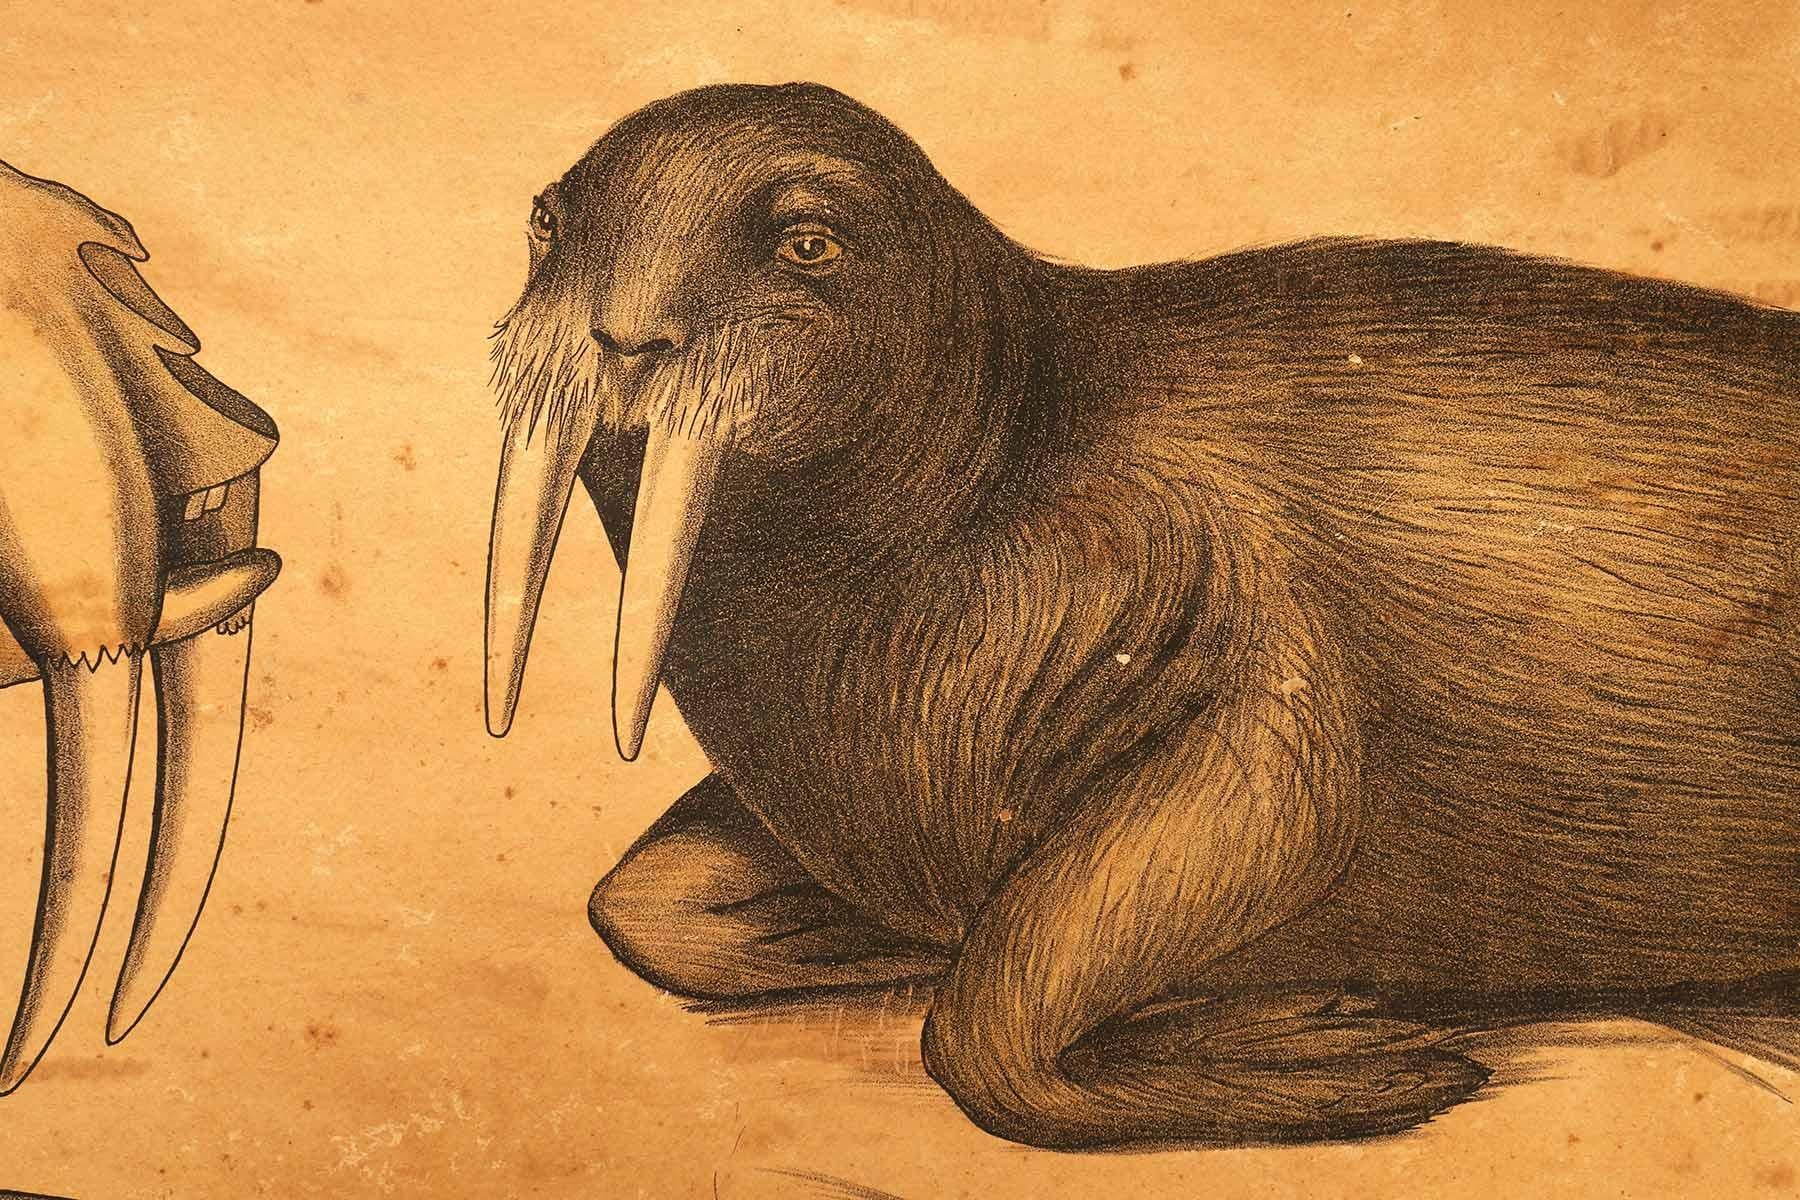 Anatomical Print on Paper, Depicting Marine Mammals, P. Dybdahls, Norway, 1890 For Sale 1